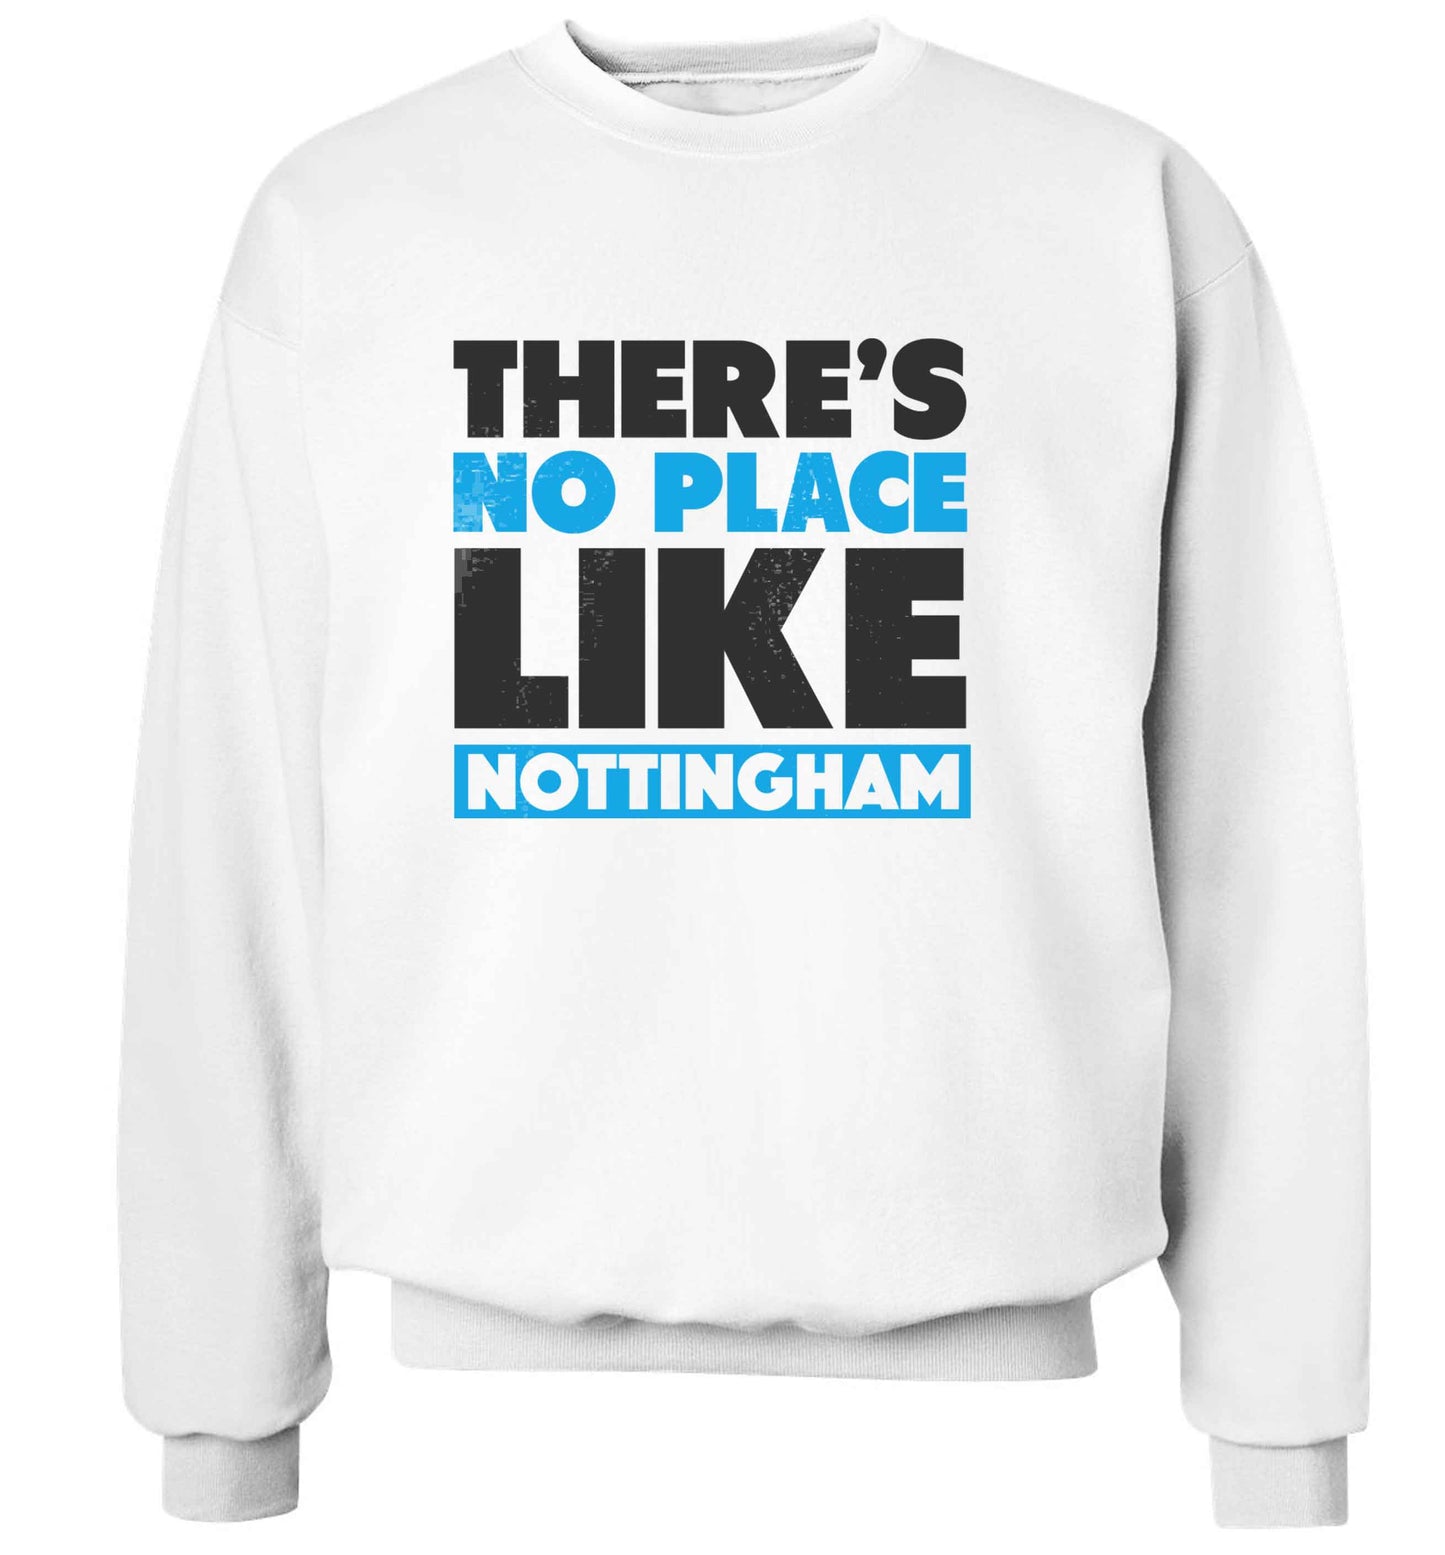 There's no place like Nottingham adult's unisex white sweater 2XL